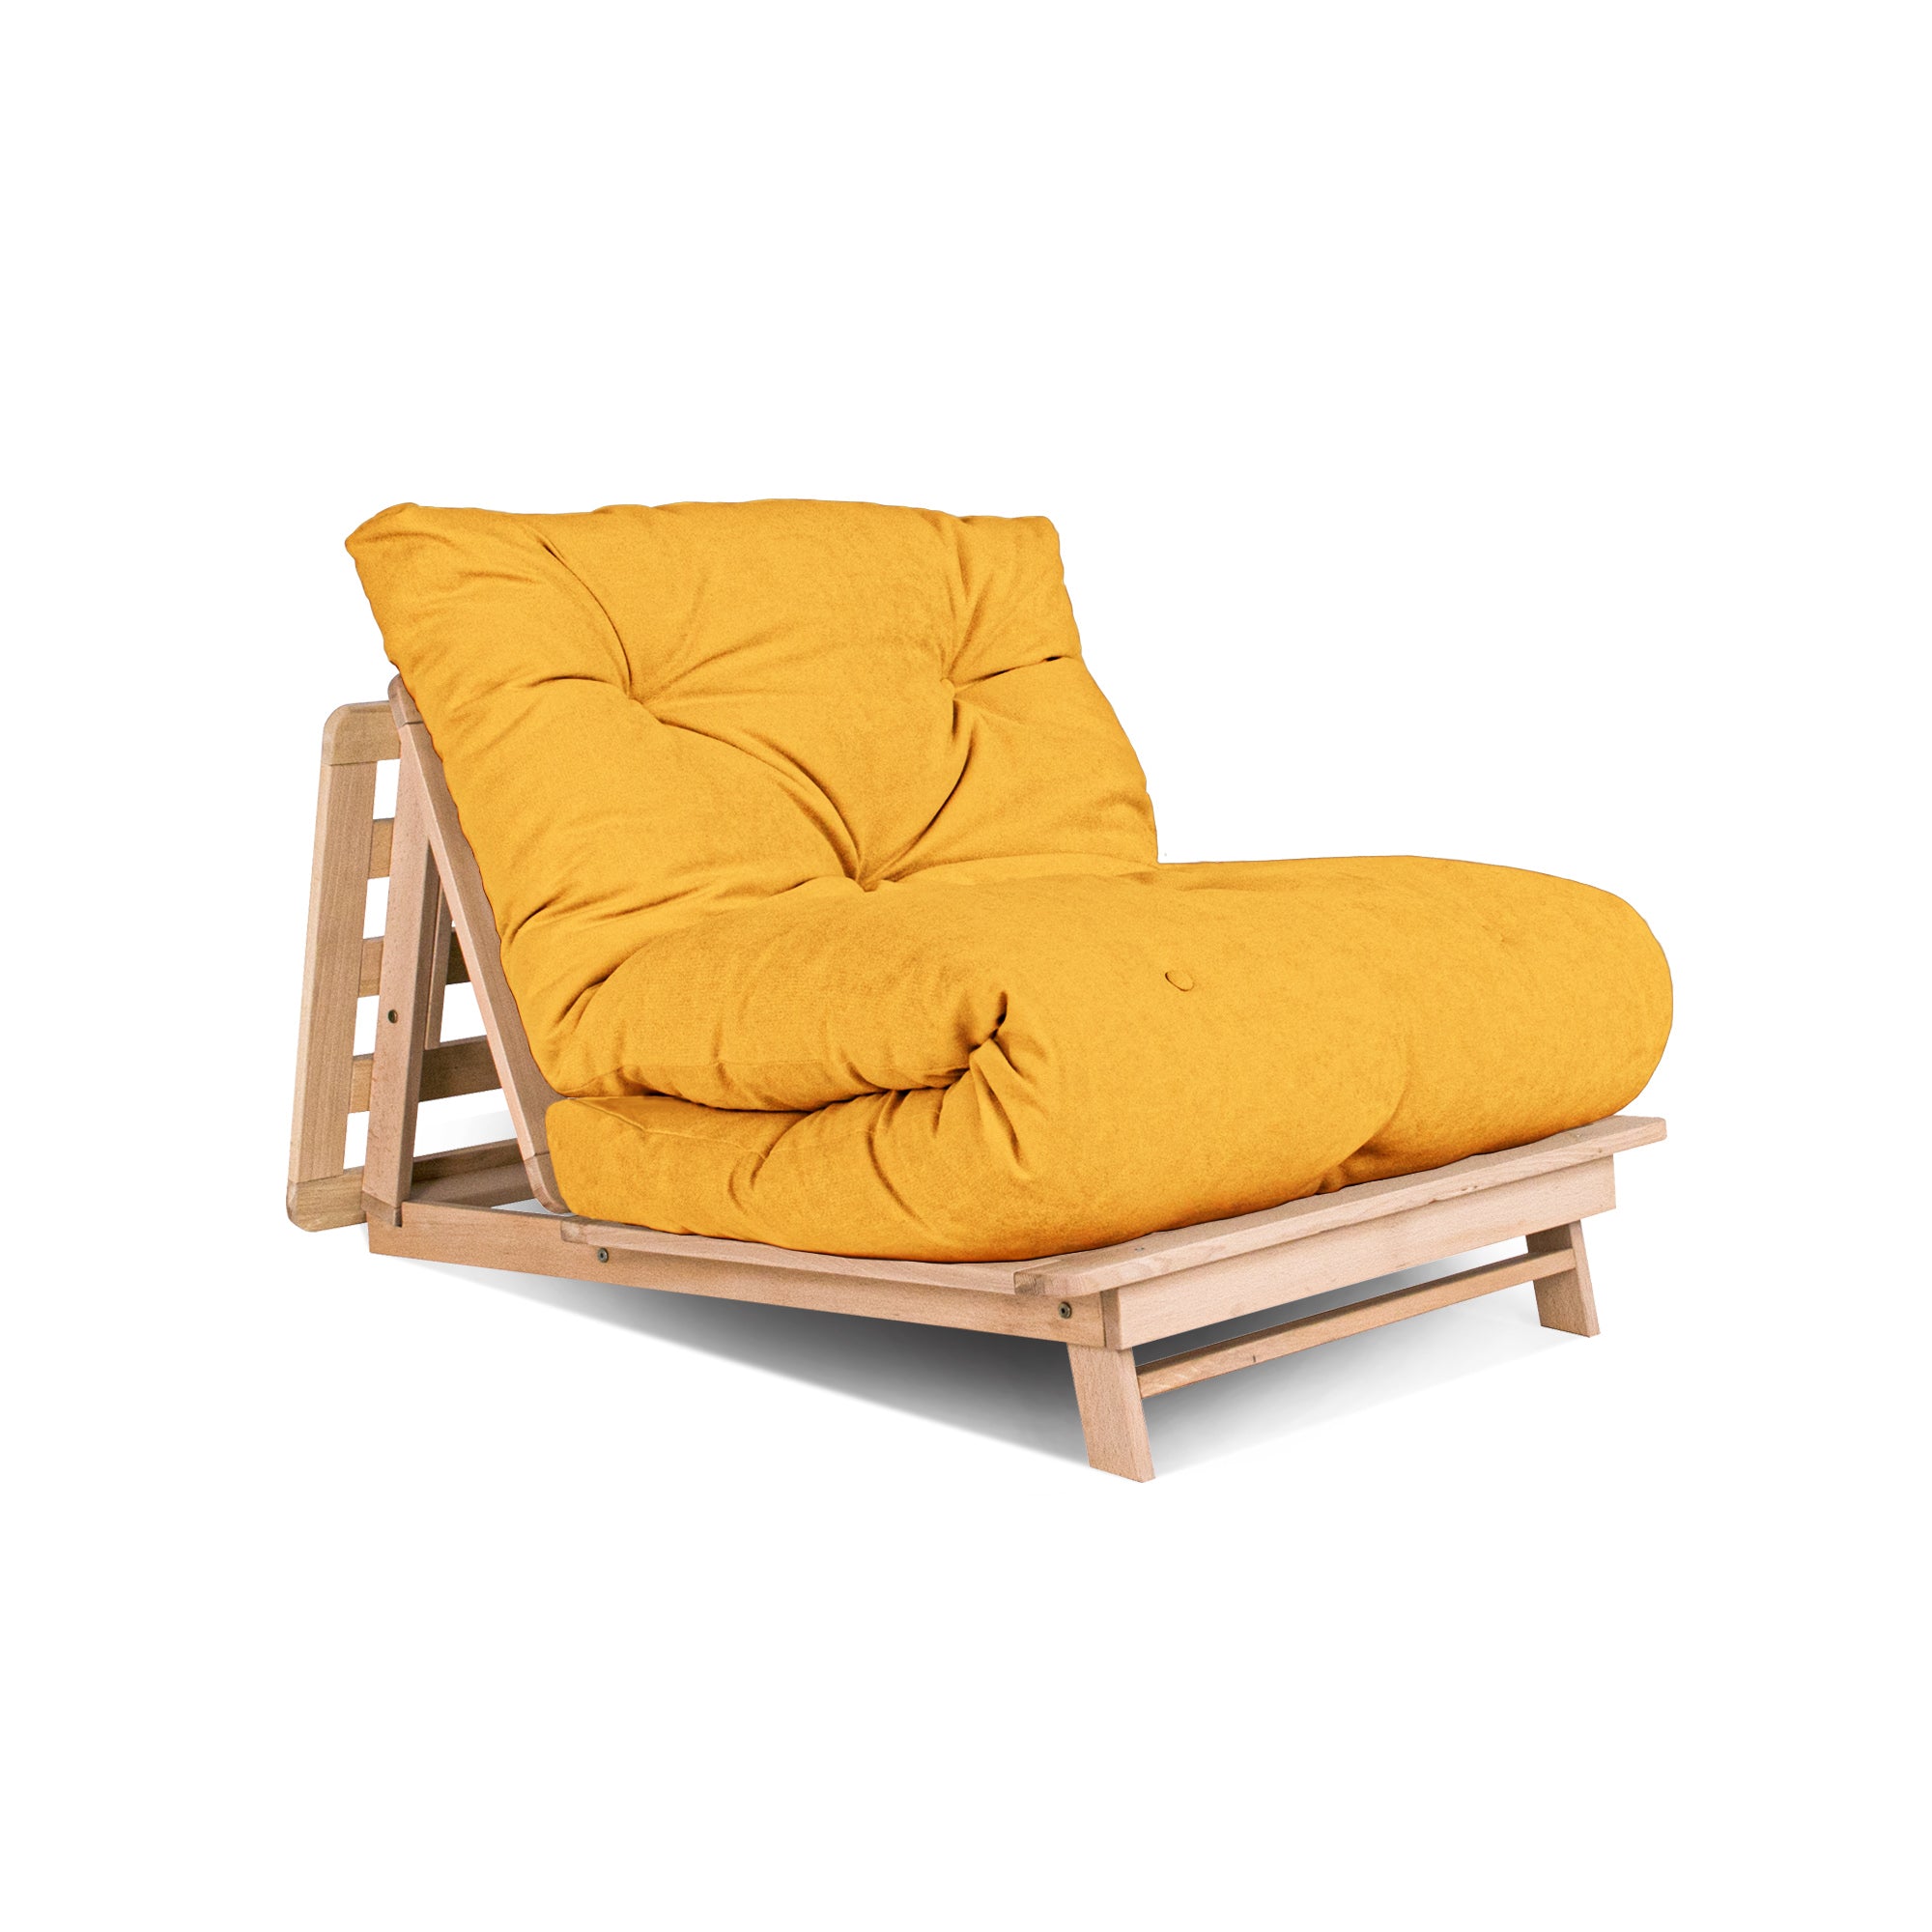 LAYTI-90 Futon Chair, Beech Wood Frame, Natural Colour-yellow fabric